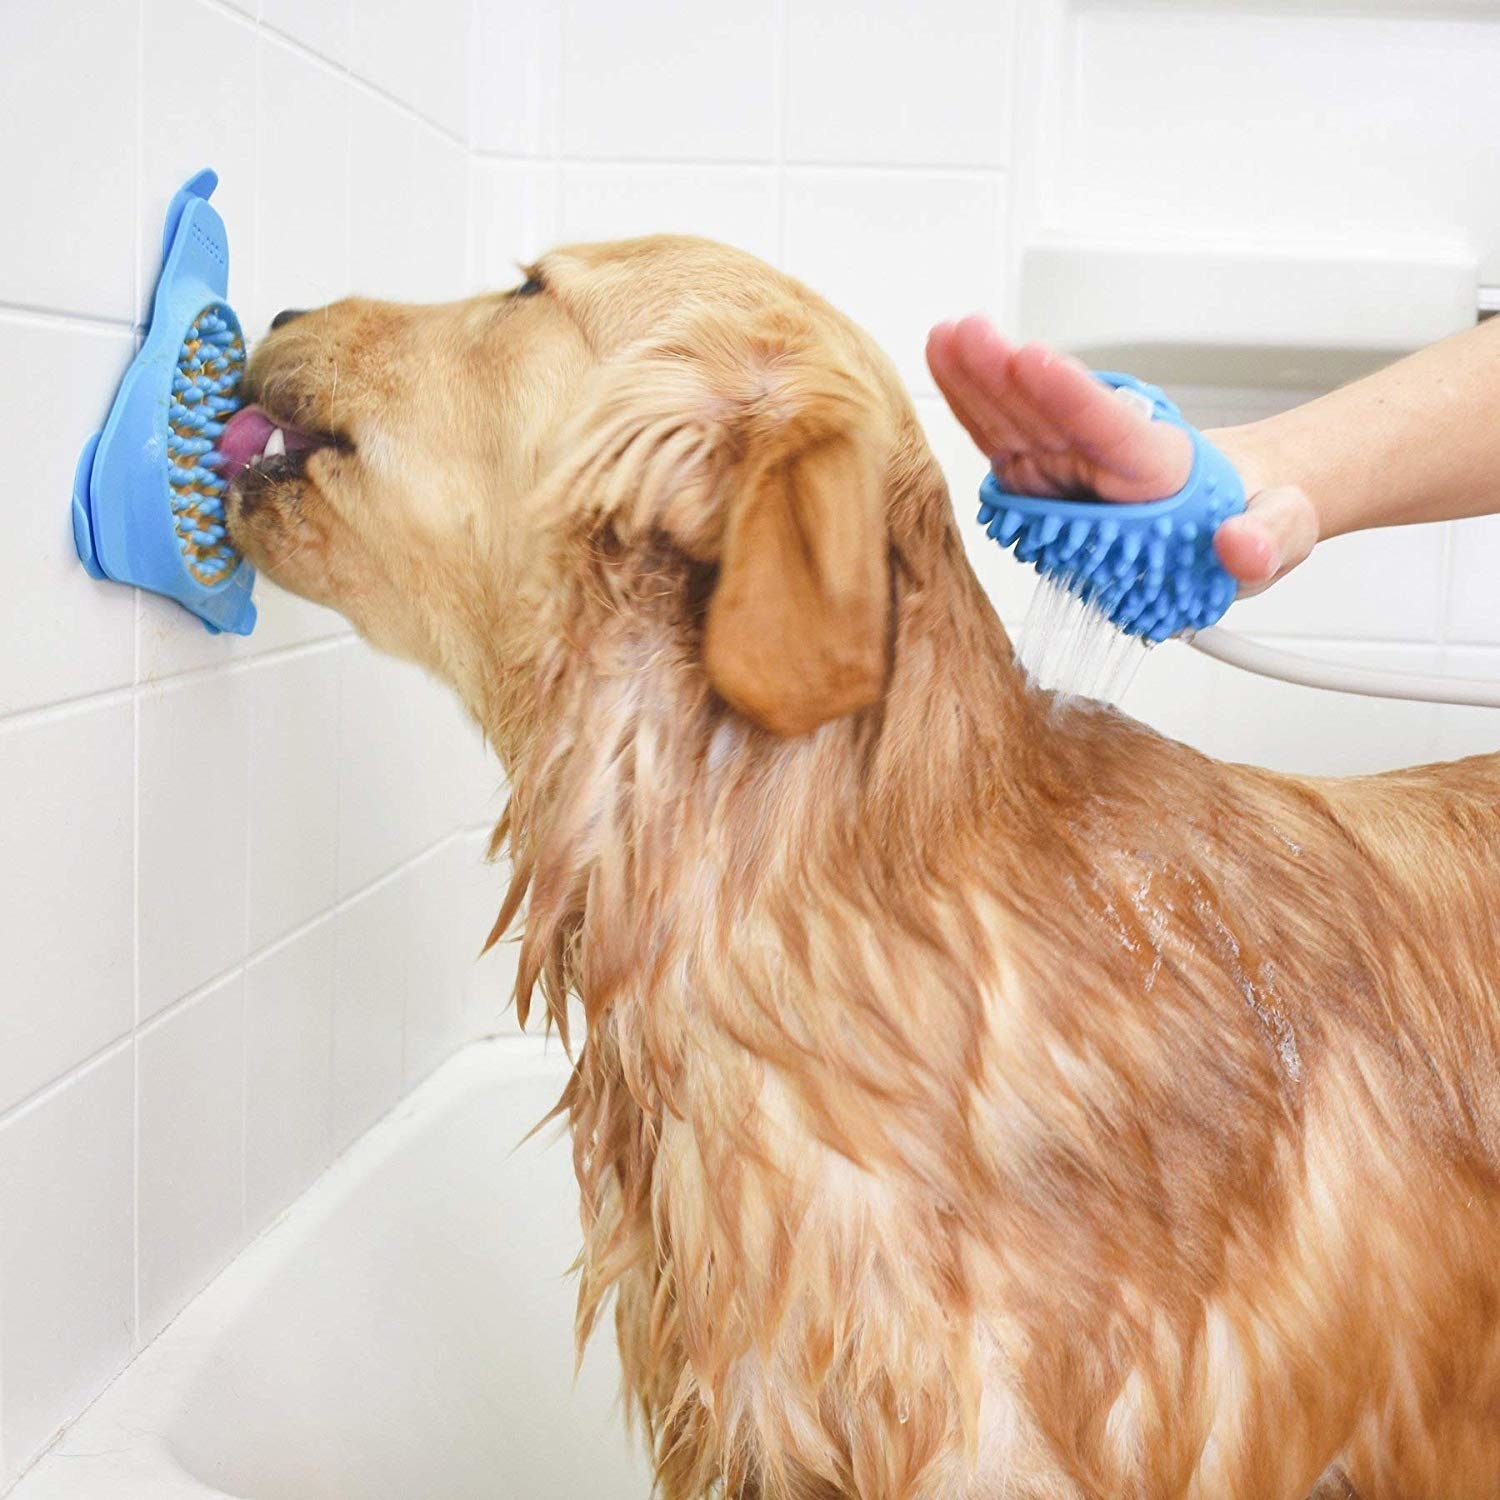 dog licks at bristled device stuck to wall with peanut butter in it while hand washes the dog with bristled device that spits out water